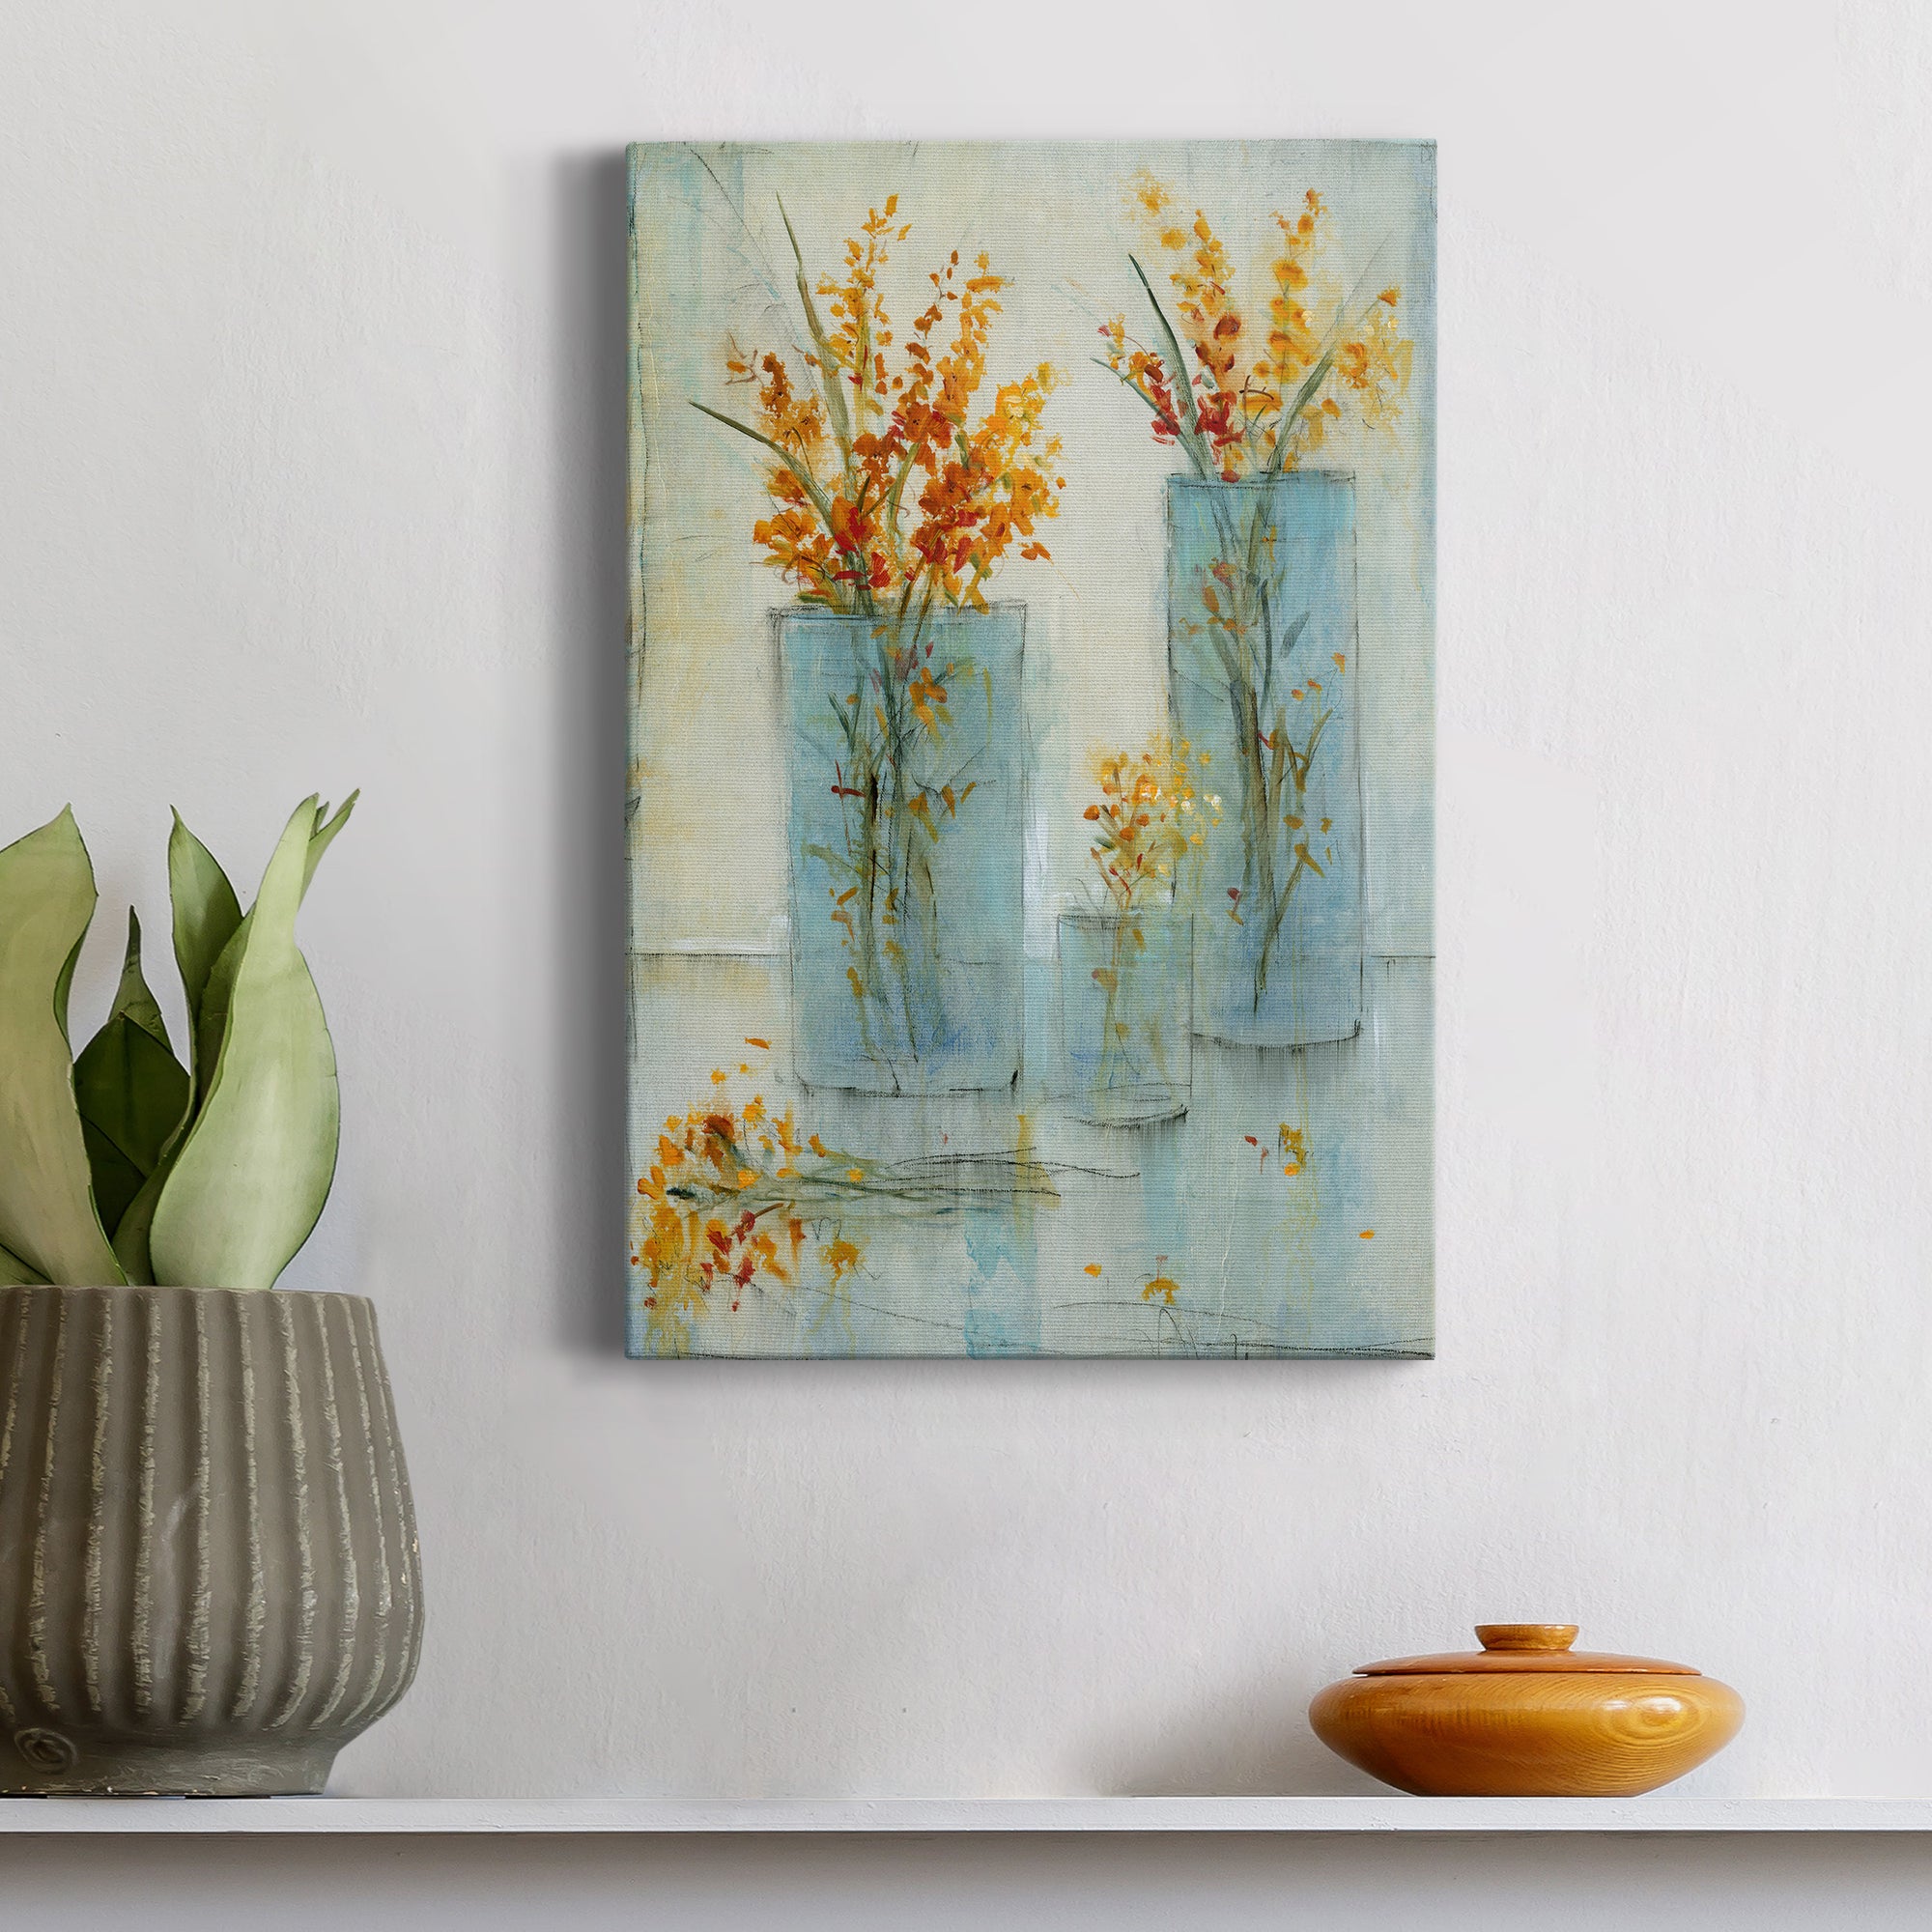 Still Life Study II Premium Gallery Wrapped Canvas - Ready to Hang